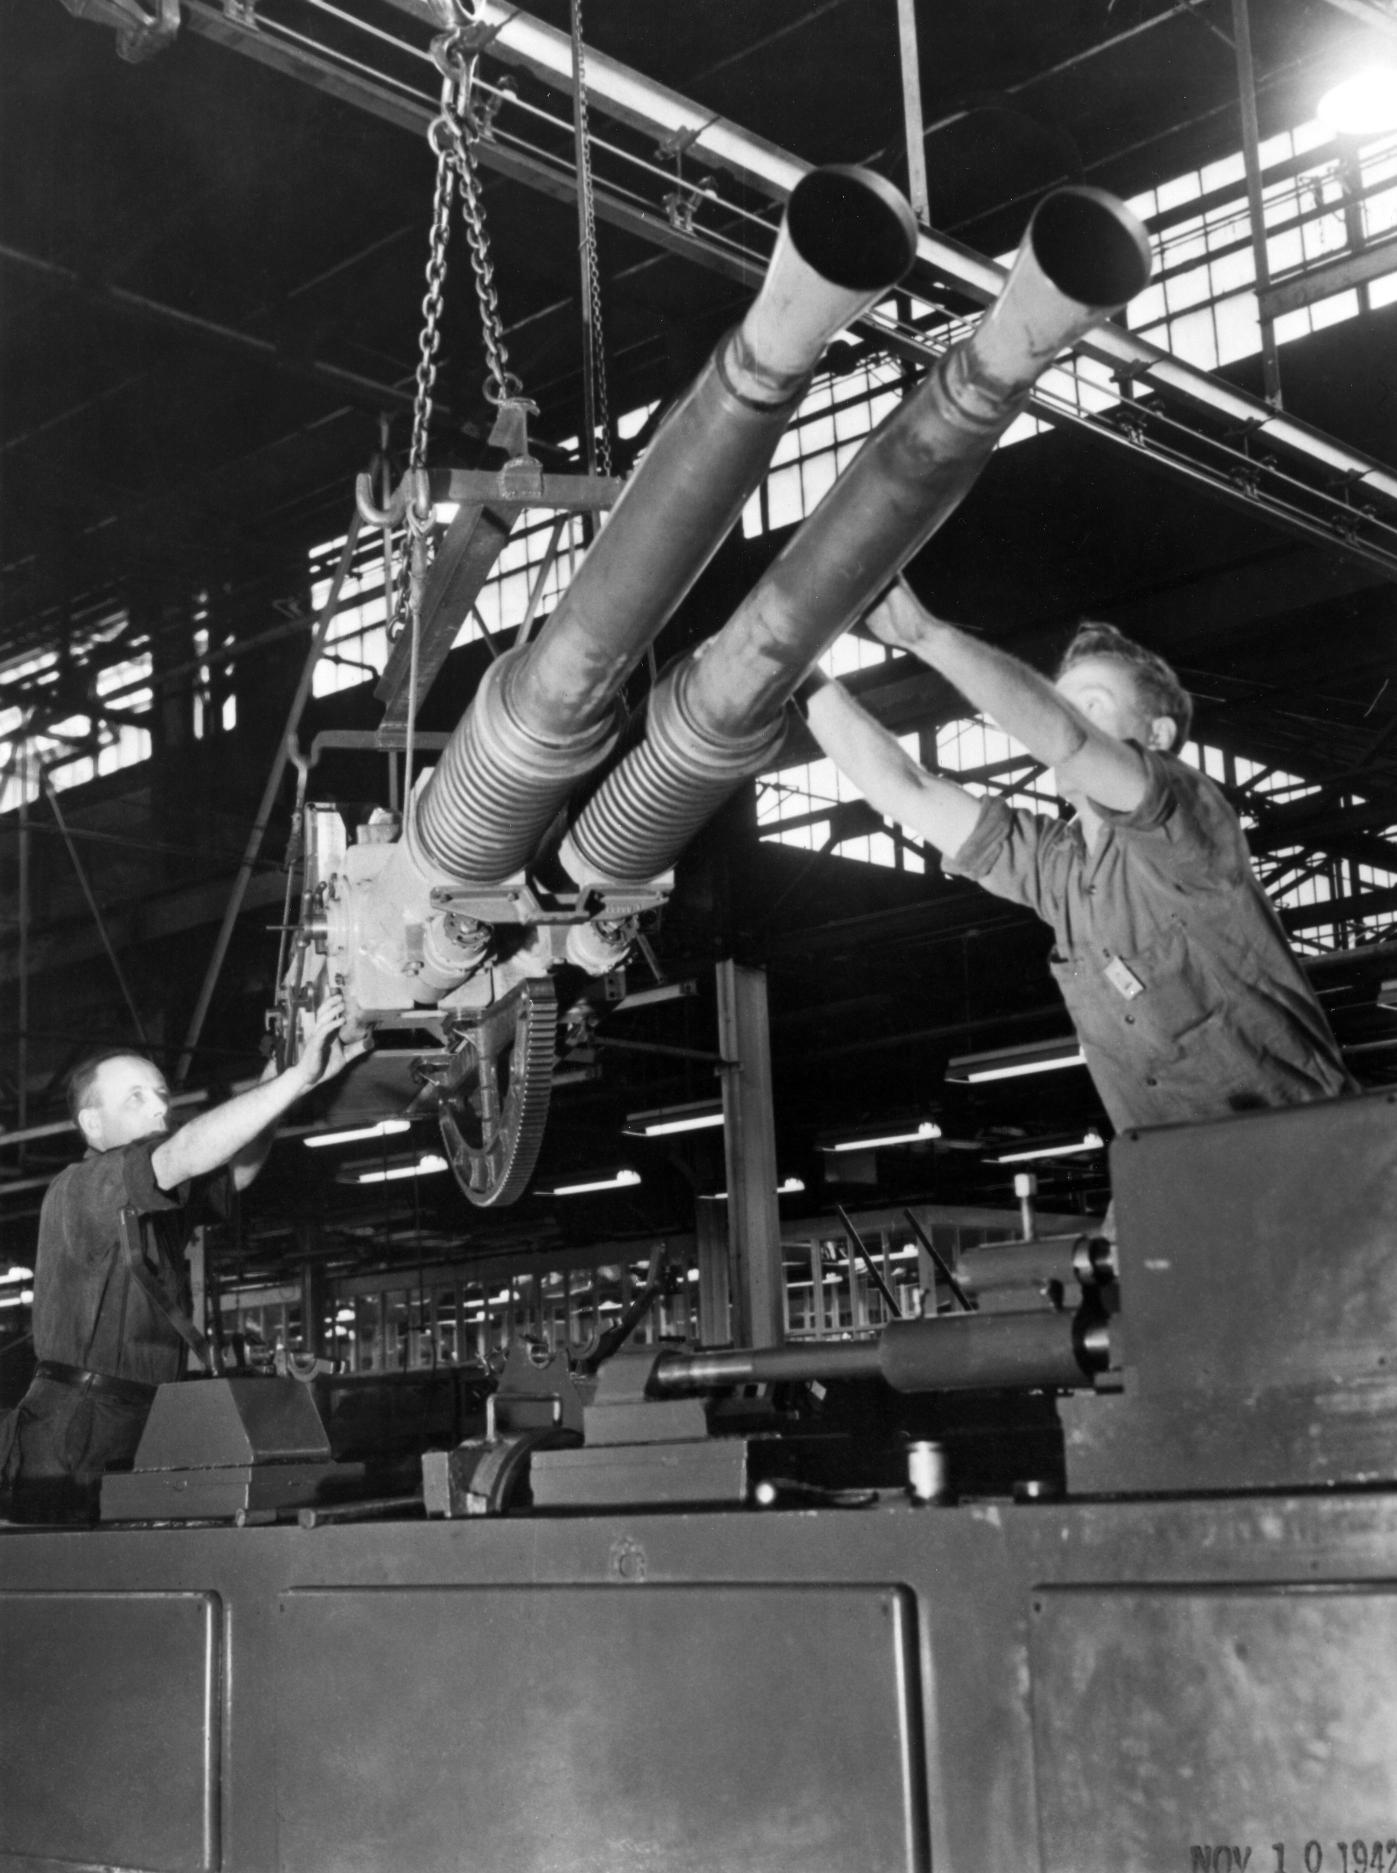 On February 4, 1942, a little more than a year after the original contract award, the first mass-produced Bofors antiaircraft guns came off Chrysler’s assembly lines.